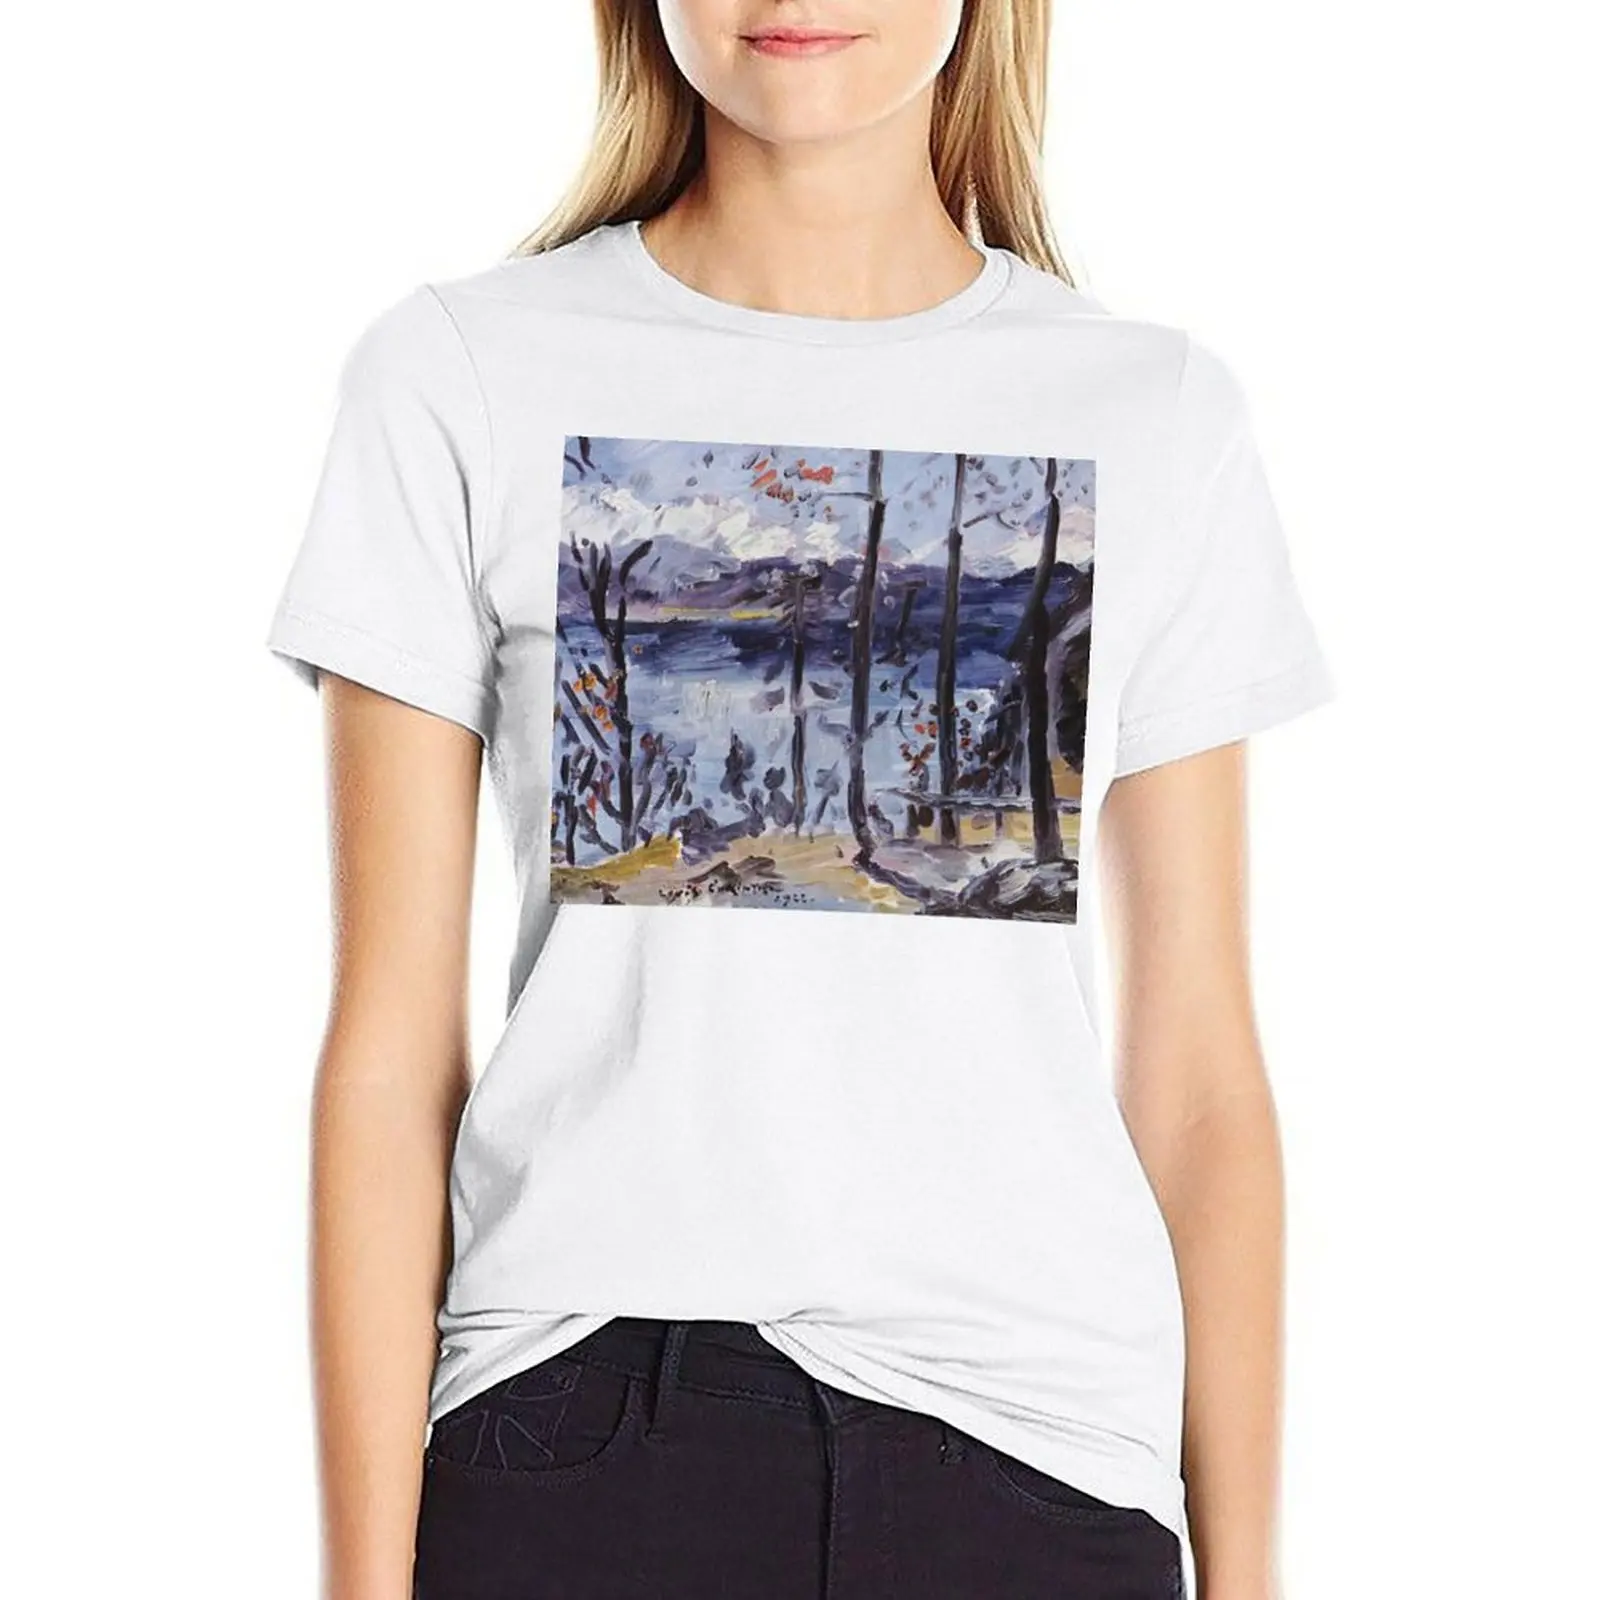 Vintage Lovis Corinth Ostern am Walchensee 1922 T-shirt tops tees Blouse funny t shirts for Women